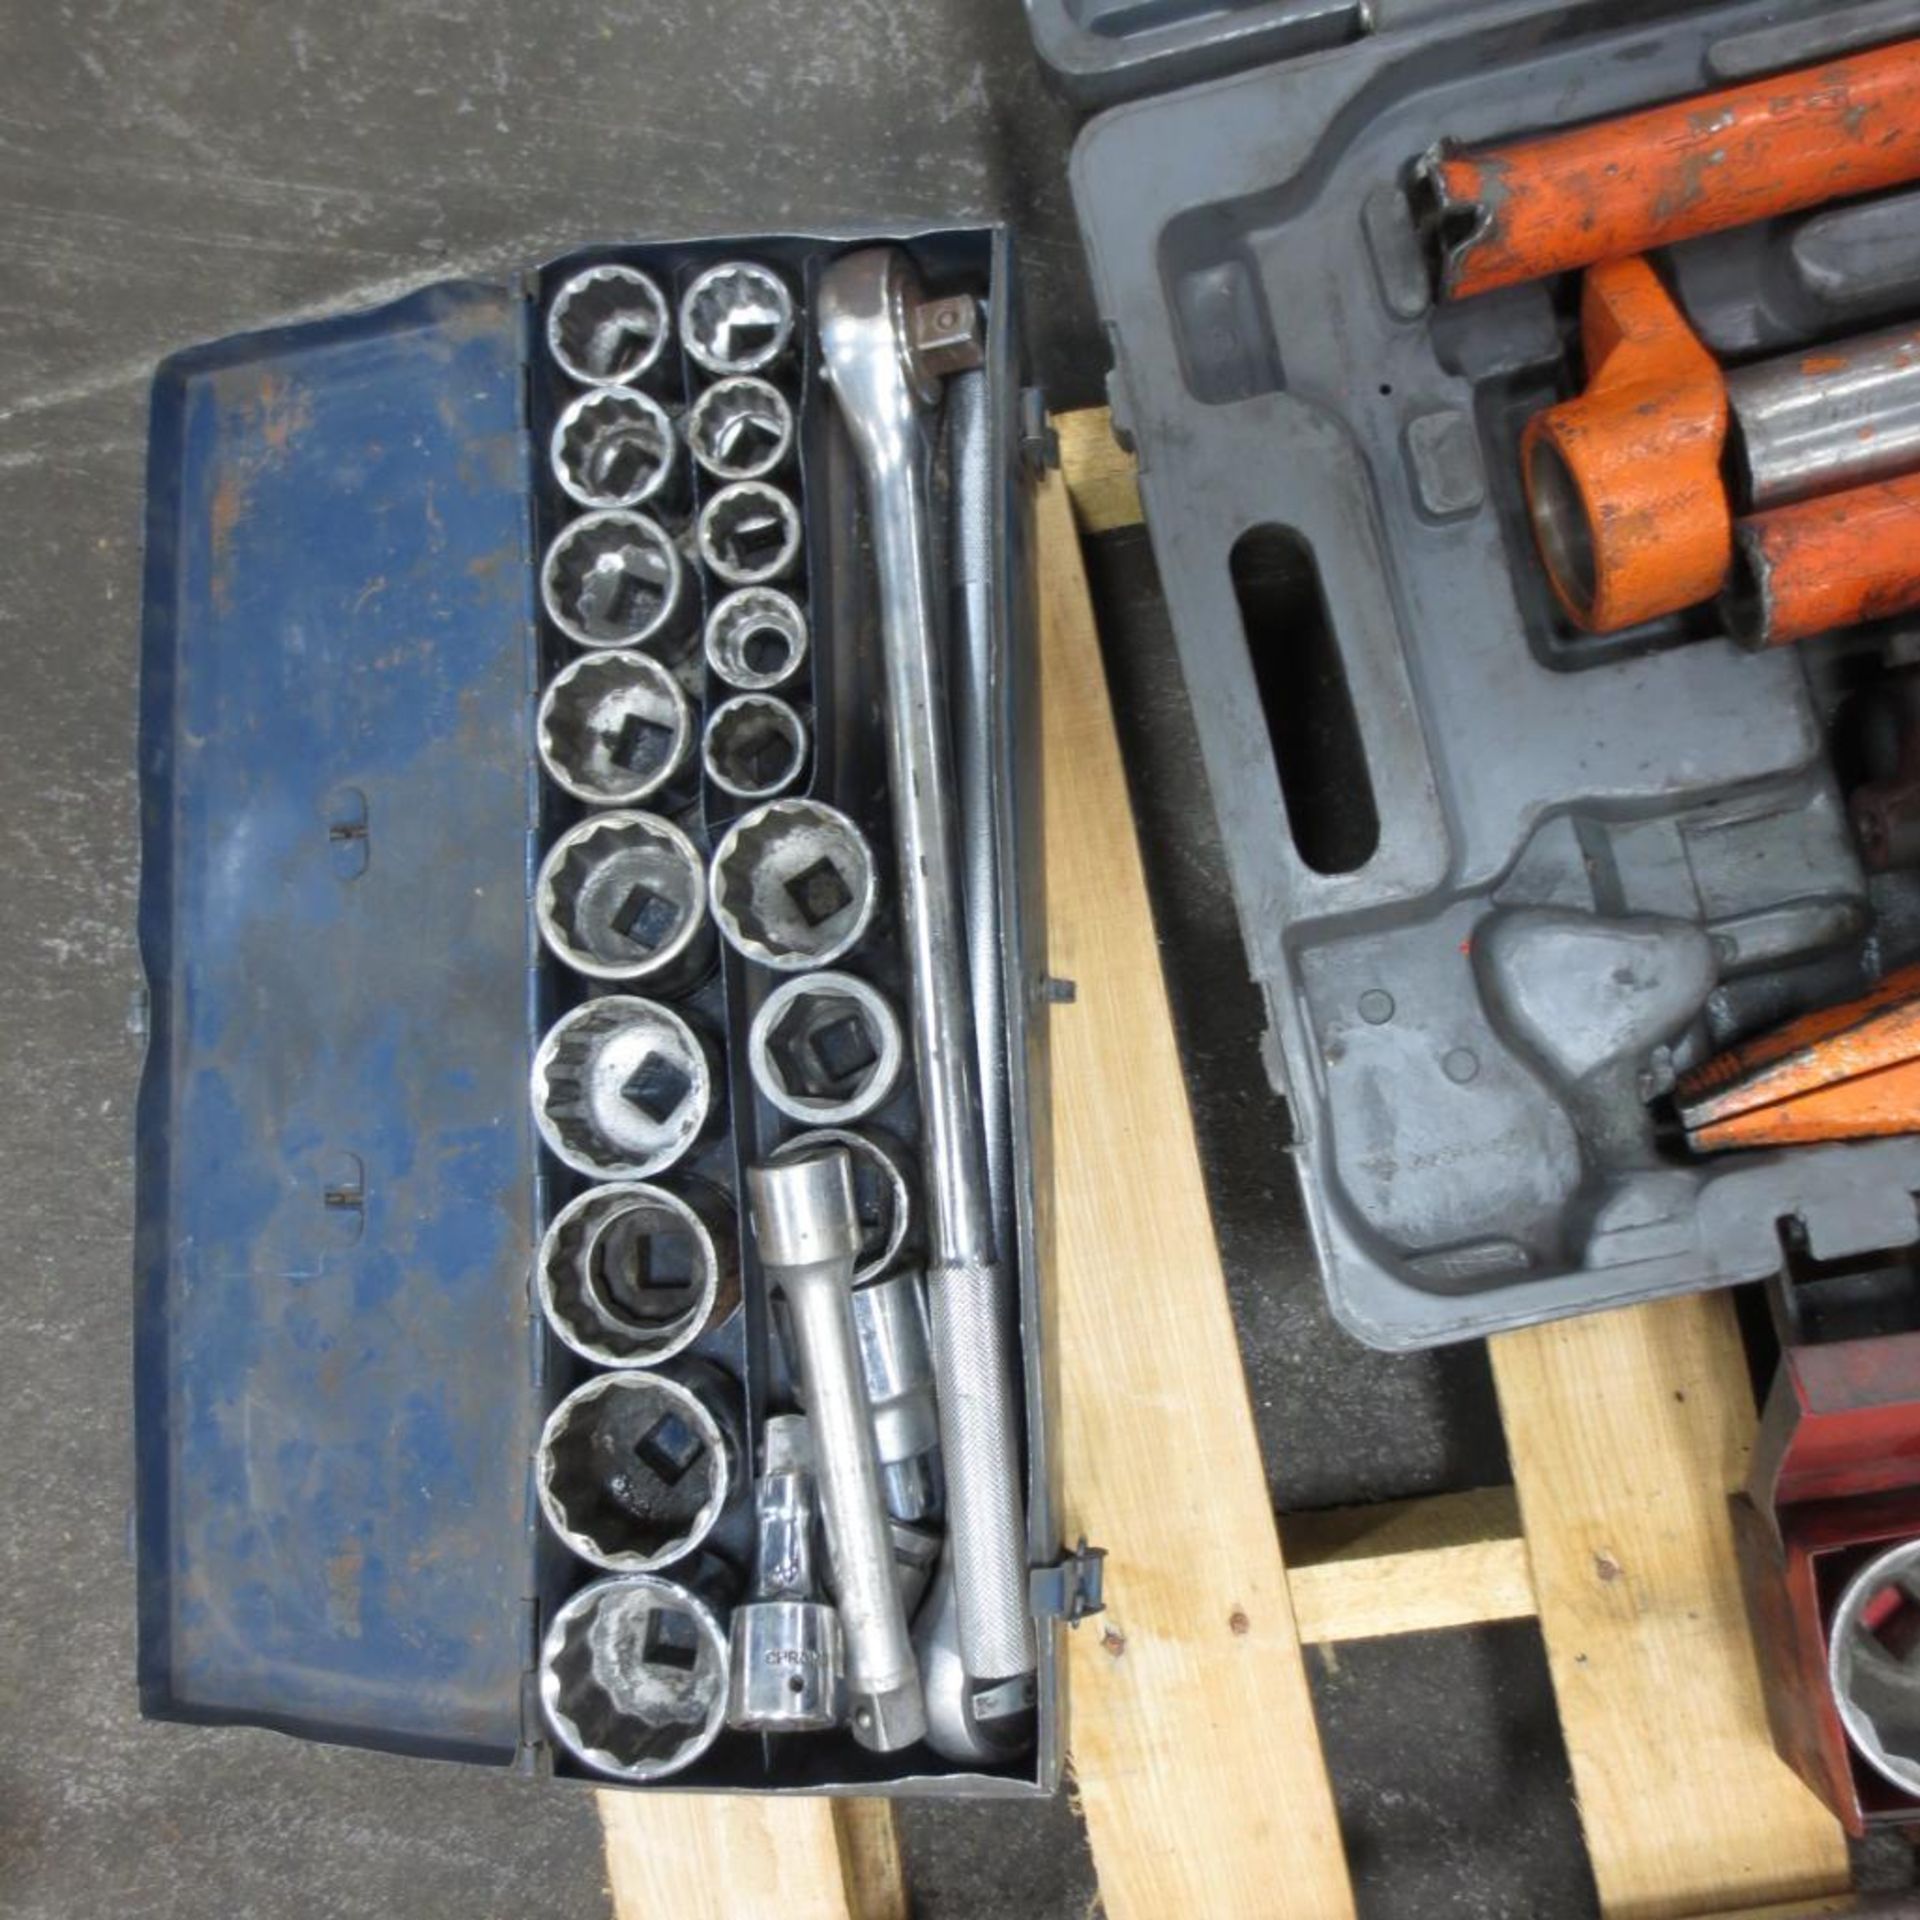 Skid with 10 Ton Portable Puller Kit, Tube Cutter, Socket and Socket Set ( Loc. Greenville, IL ) - Image 4 of 4